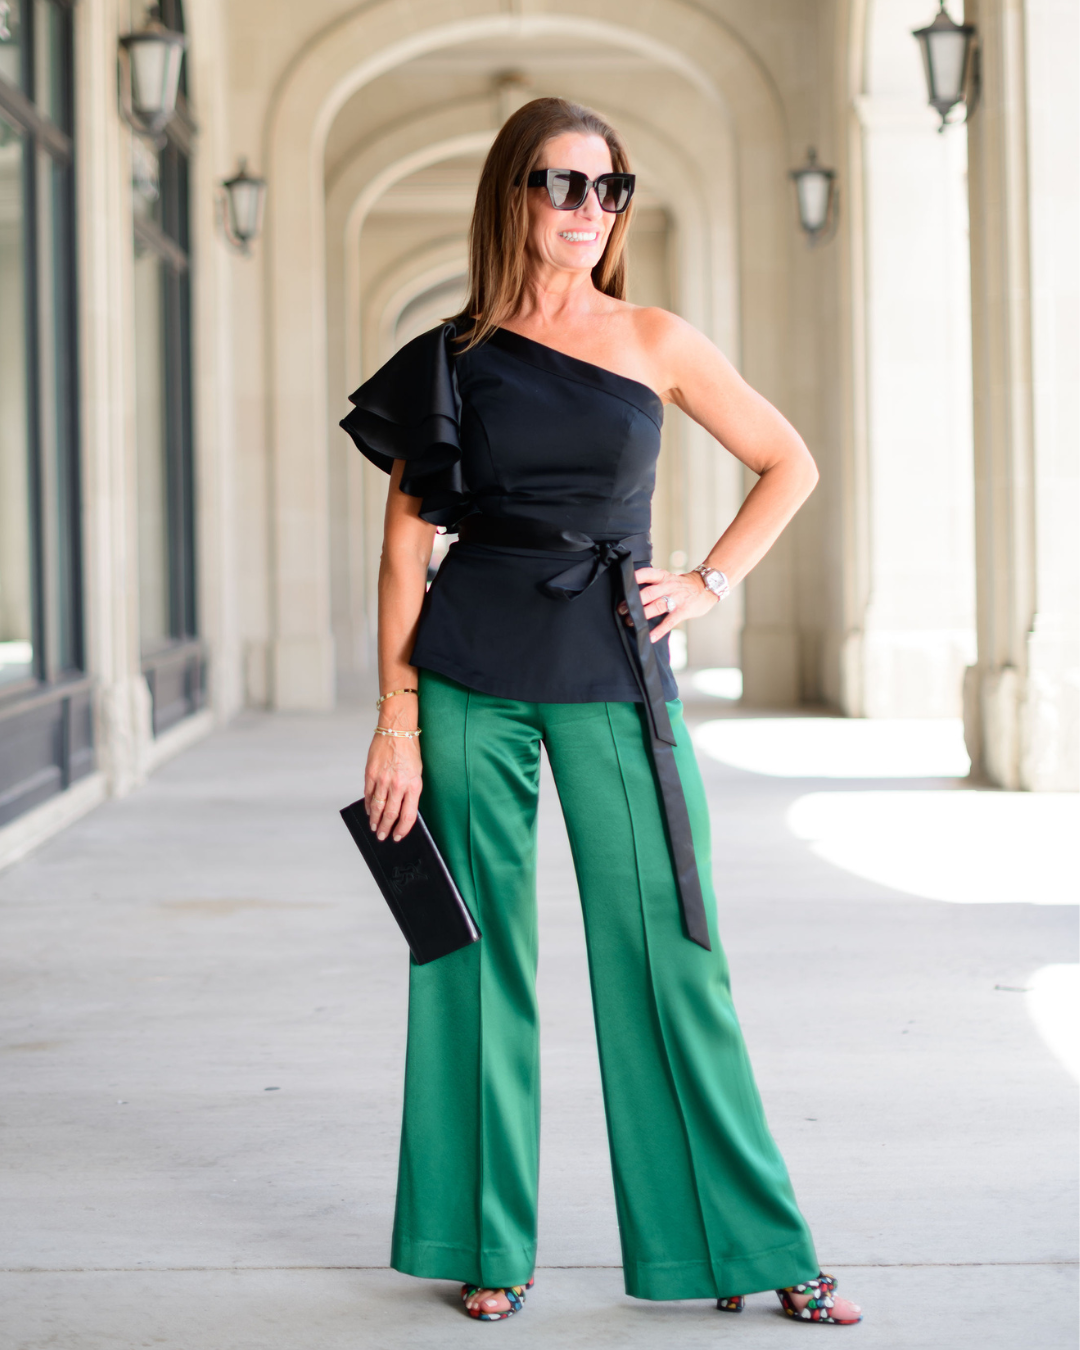 Spring Color Edit: Shades of Green

Spring, color, green, green outfit, outfit guide, holiday outfit, St. Patrick's Day, green wide leg pants black top